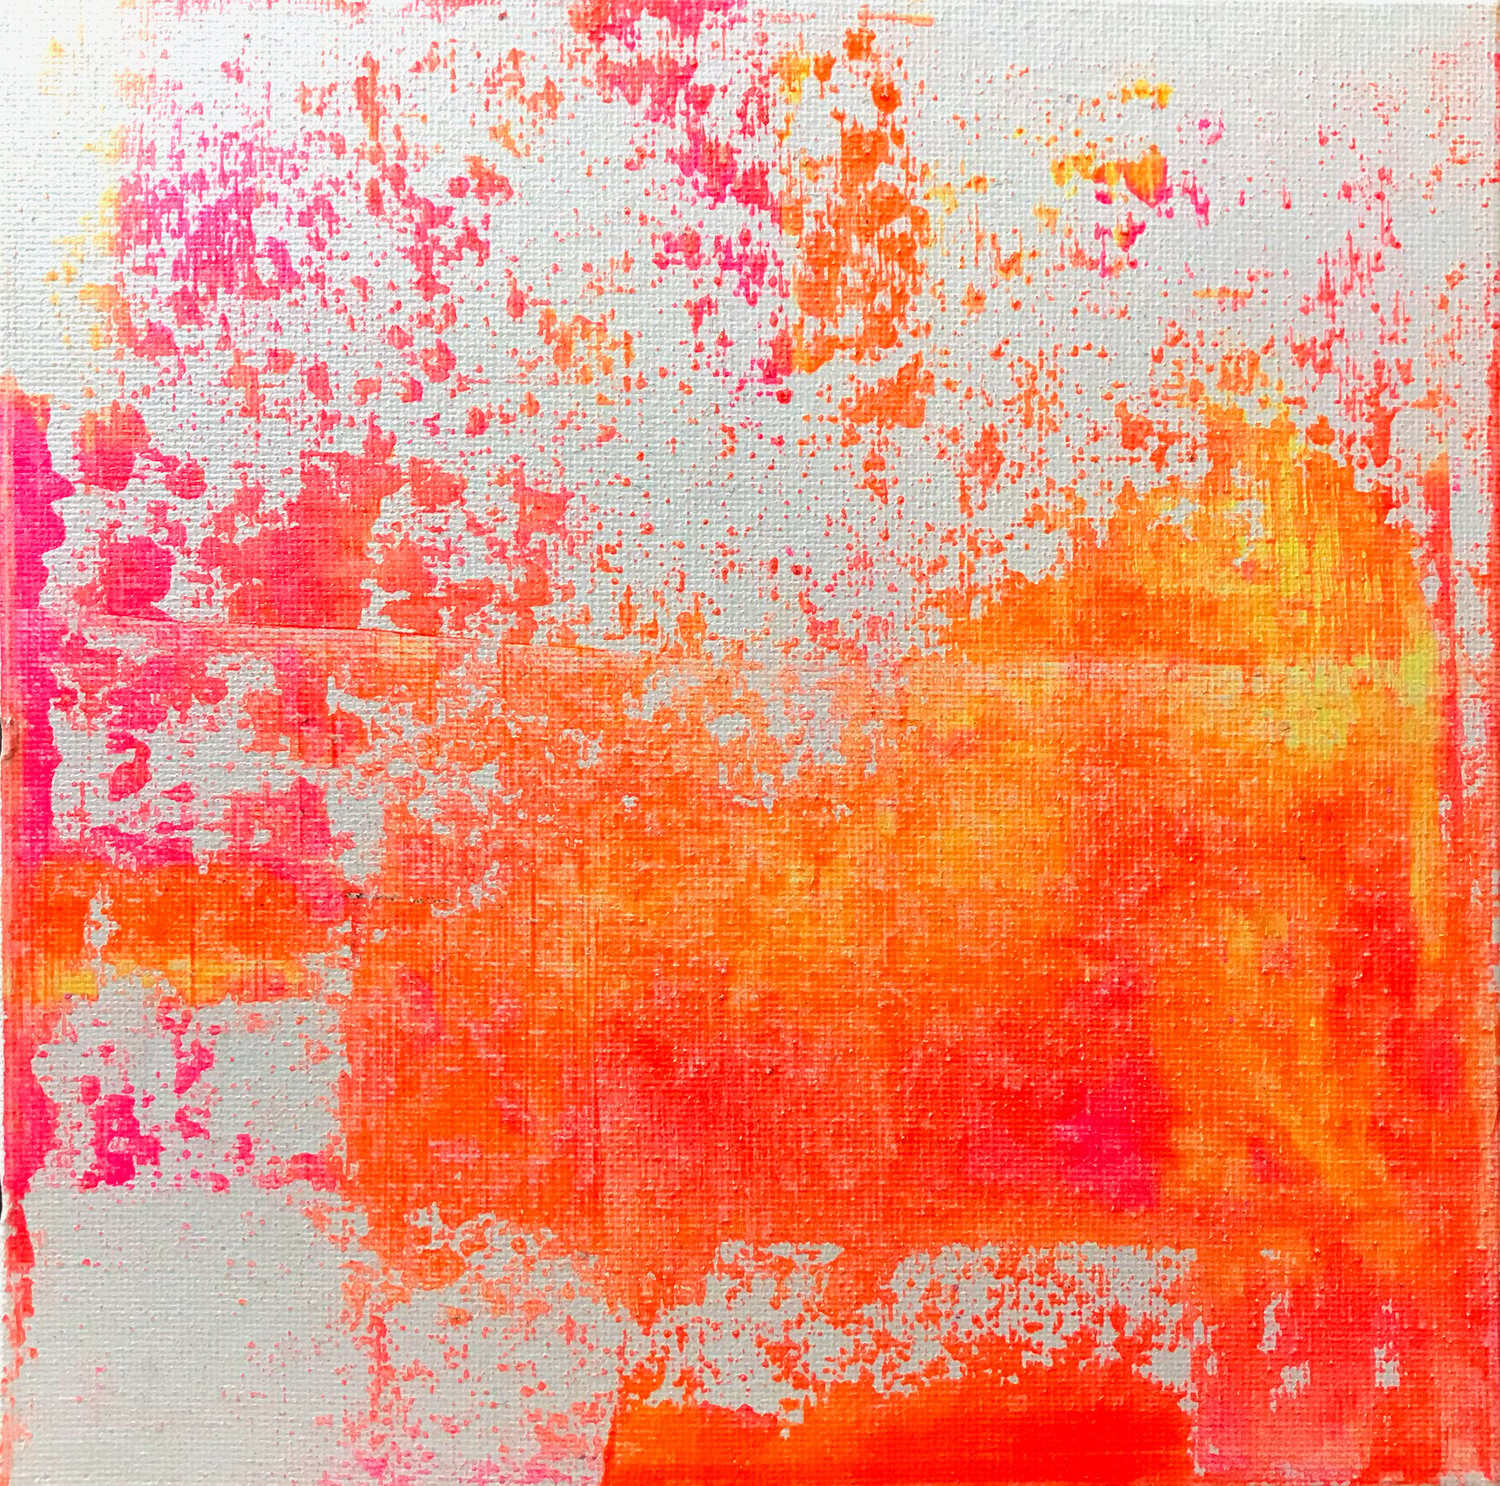 Intense colour structure - acrylic on canvasboard, 20x20cm